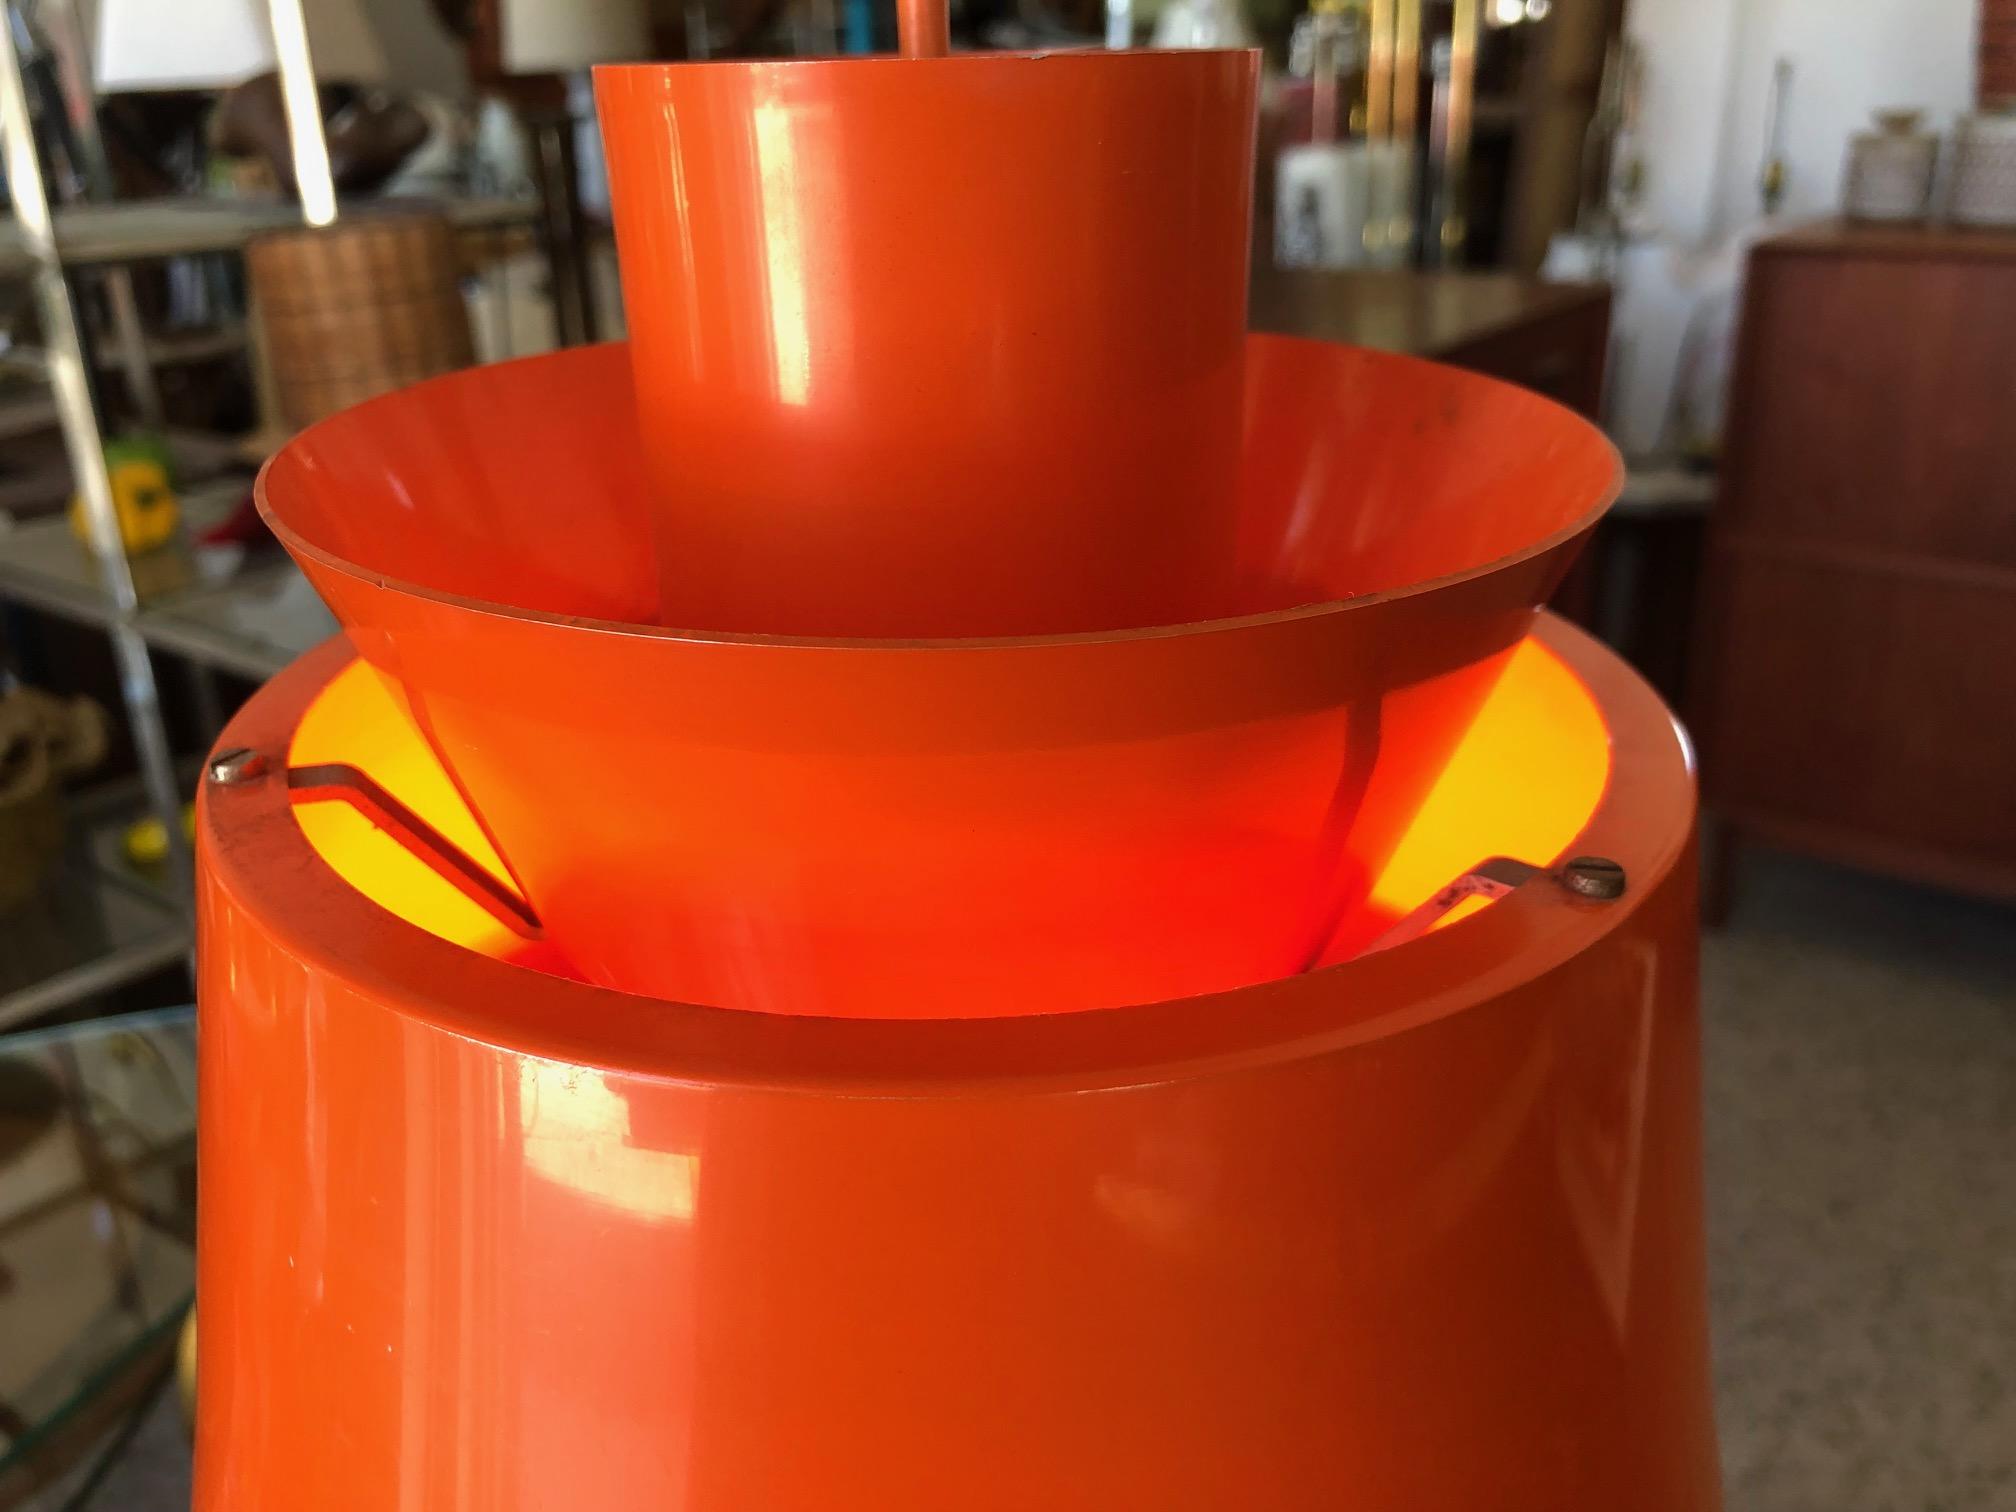 An unusual mid century Danish pendant lamp. All original with orange cord. Designed by Jørn Utzon, produced by Nordisk Solar Compagni, ca' 1963. A quick note about the architect: 